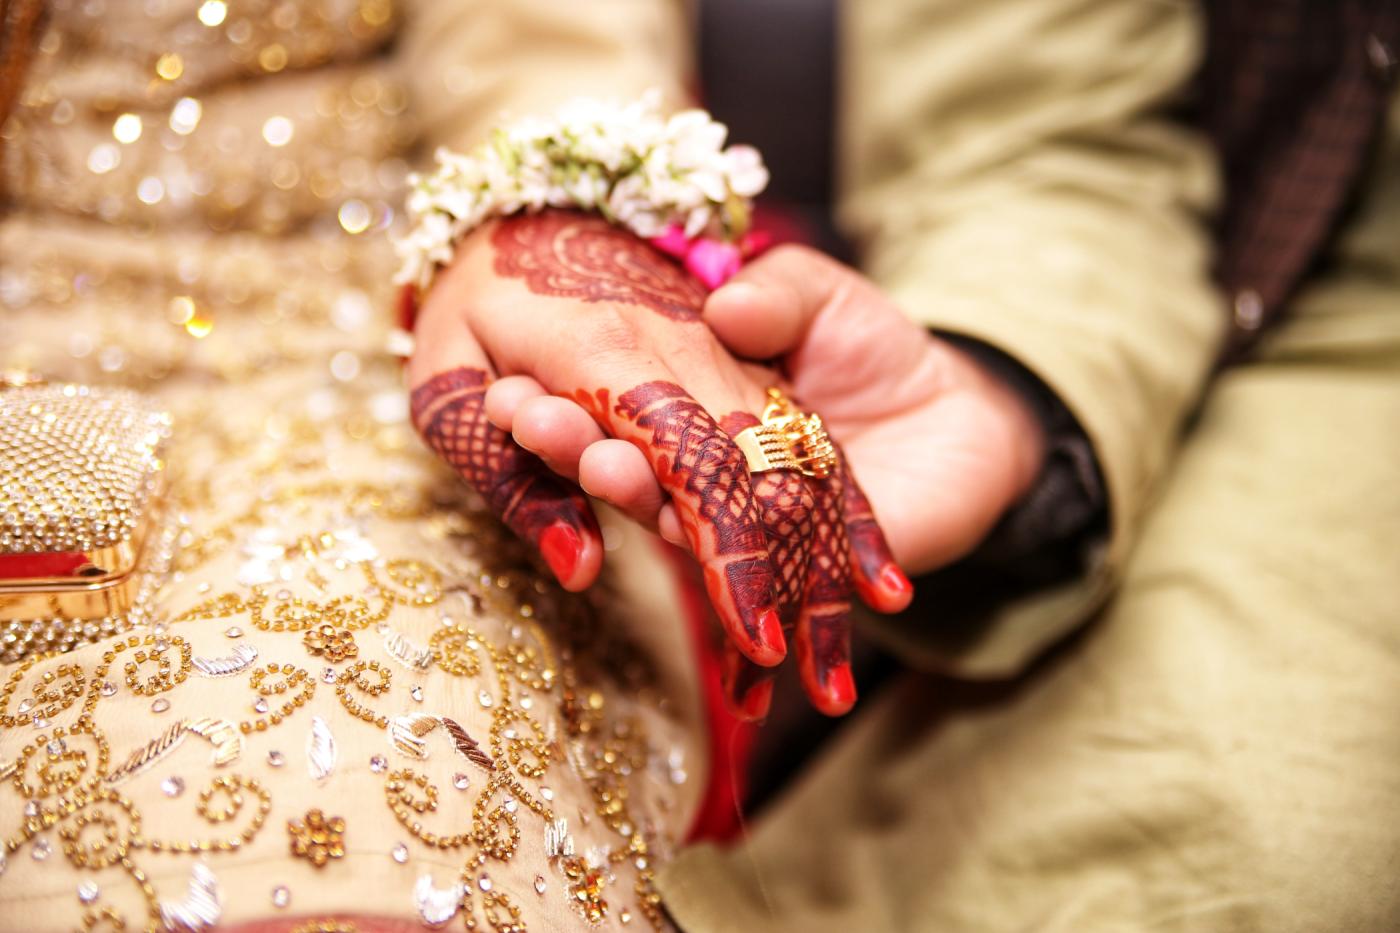 Inter-Caste Marriage And The Indian Constitution: A Comprehensive Analysis